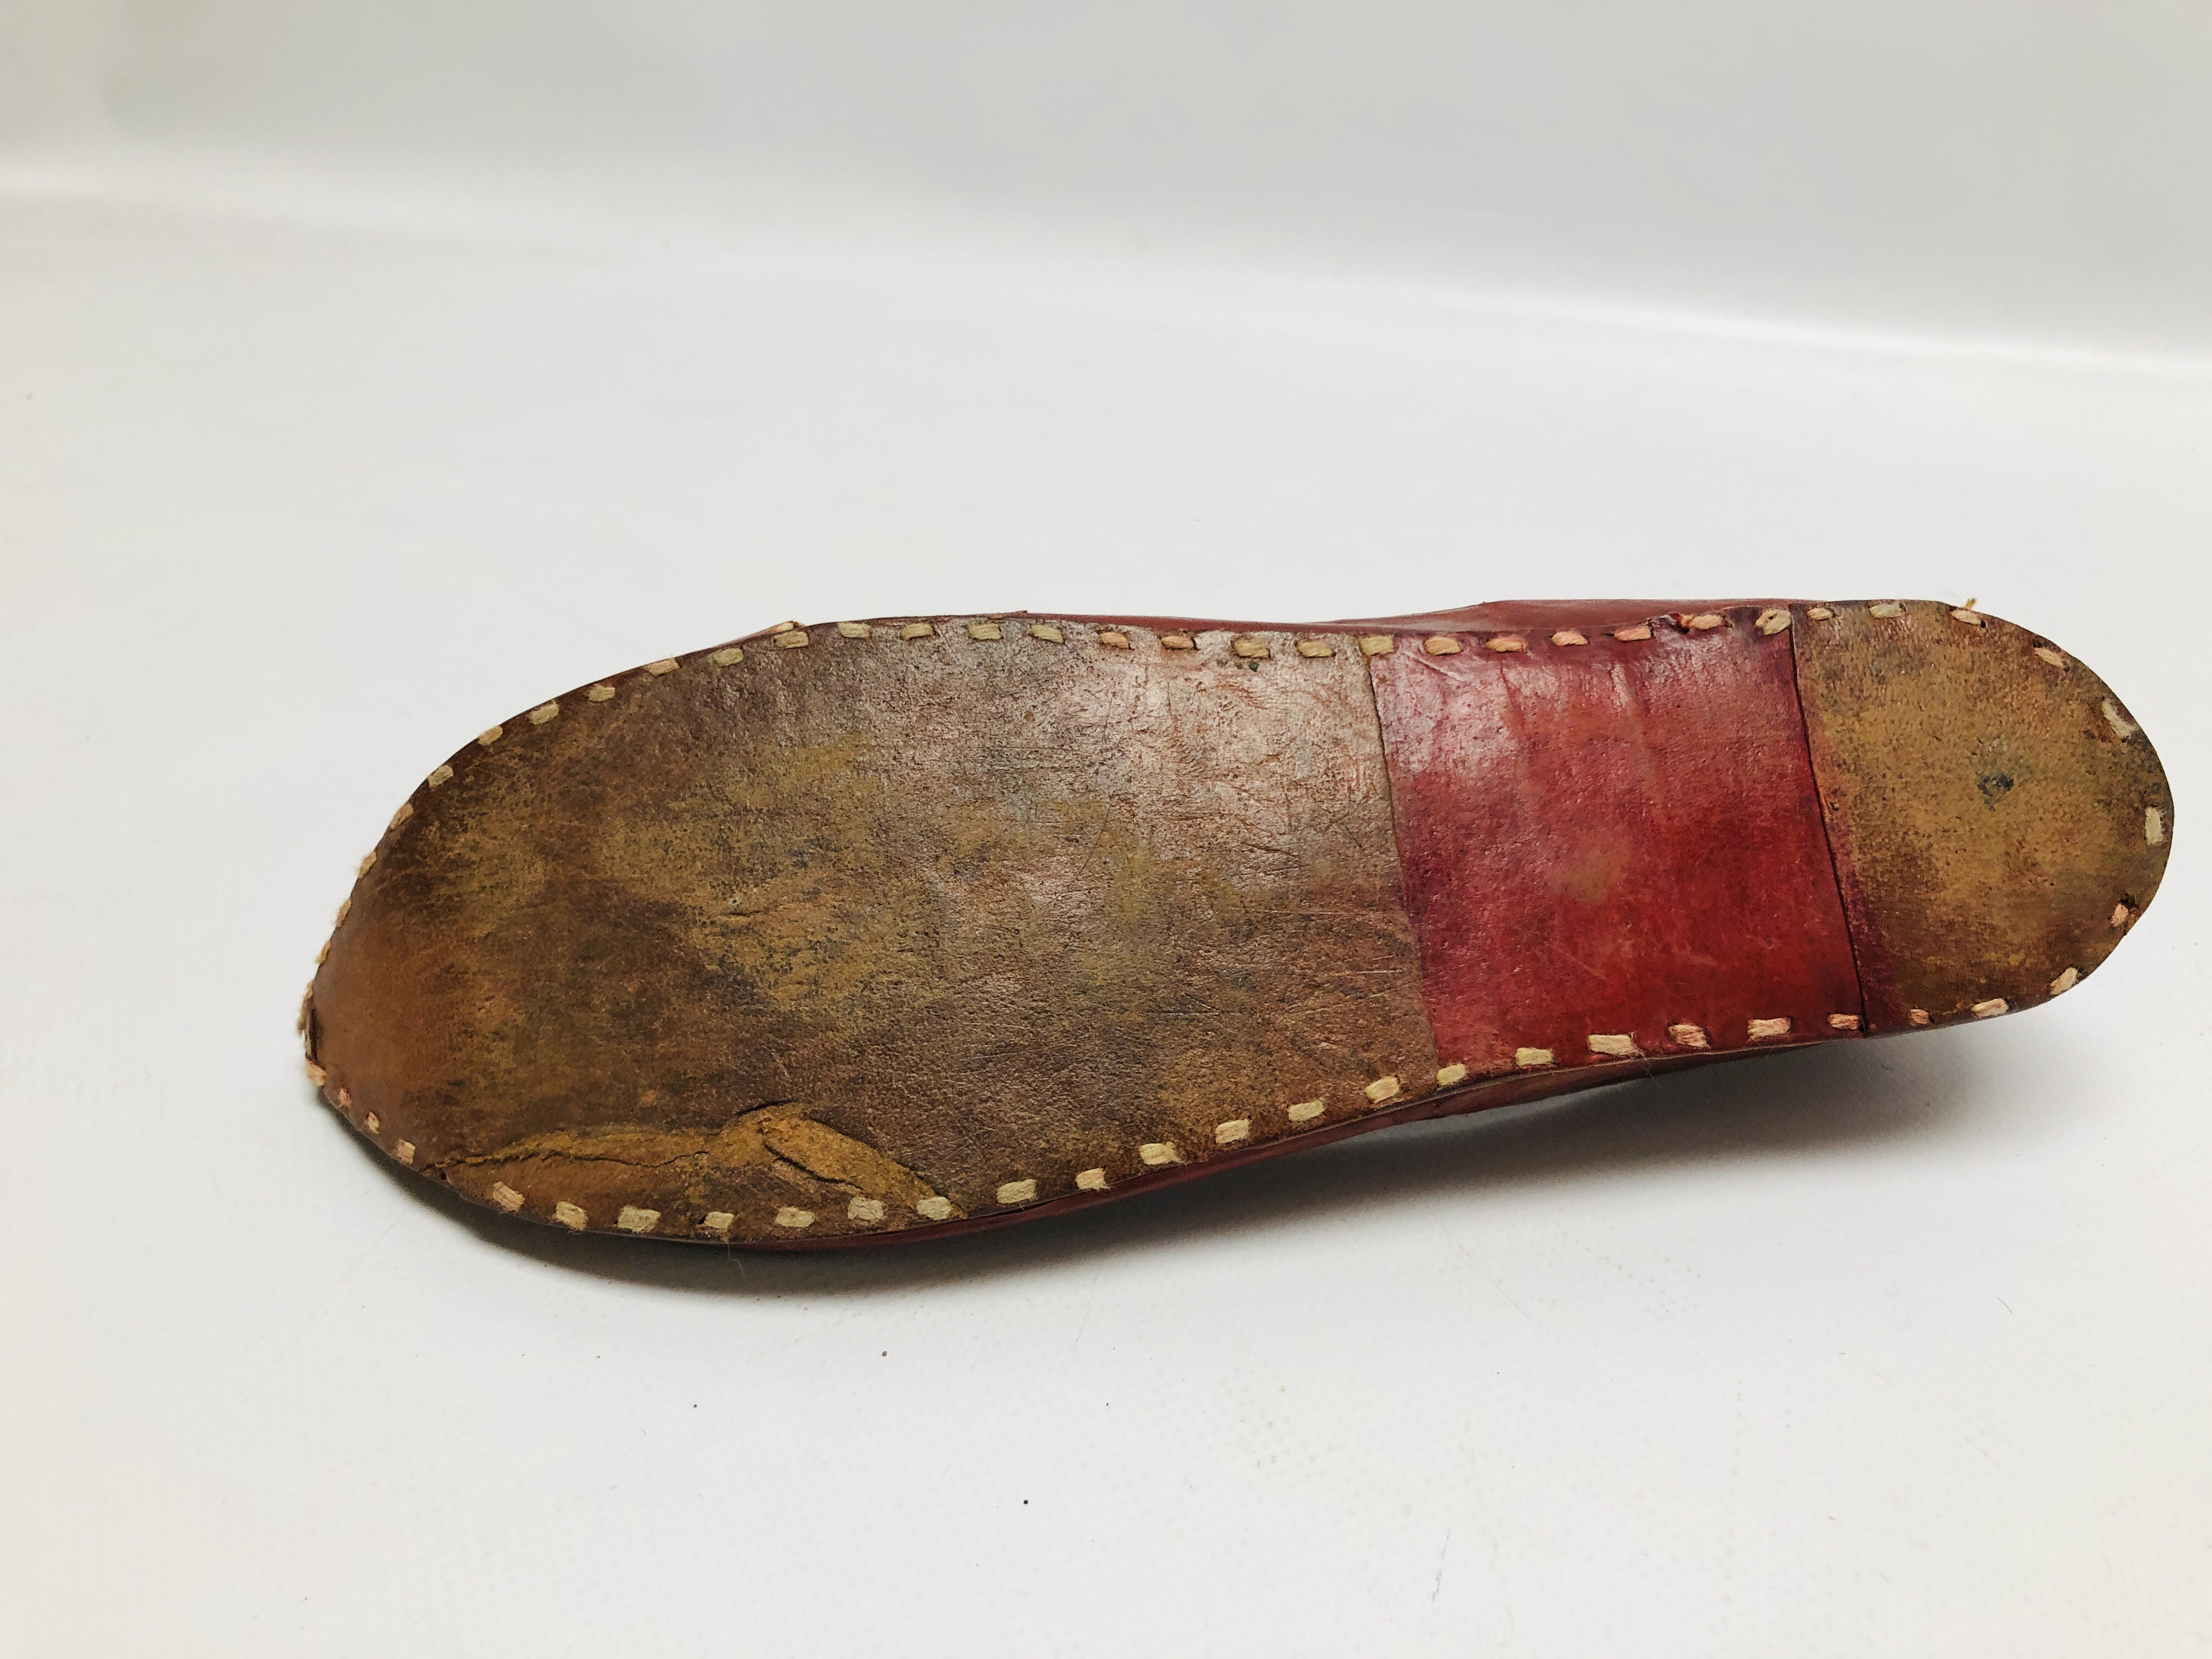 PAIR OF EARLY C20TH AFGHAN LEATHER SHOES WITH GOLD THREAD EMBROIDERY. - Image 6 of 10